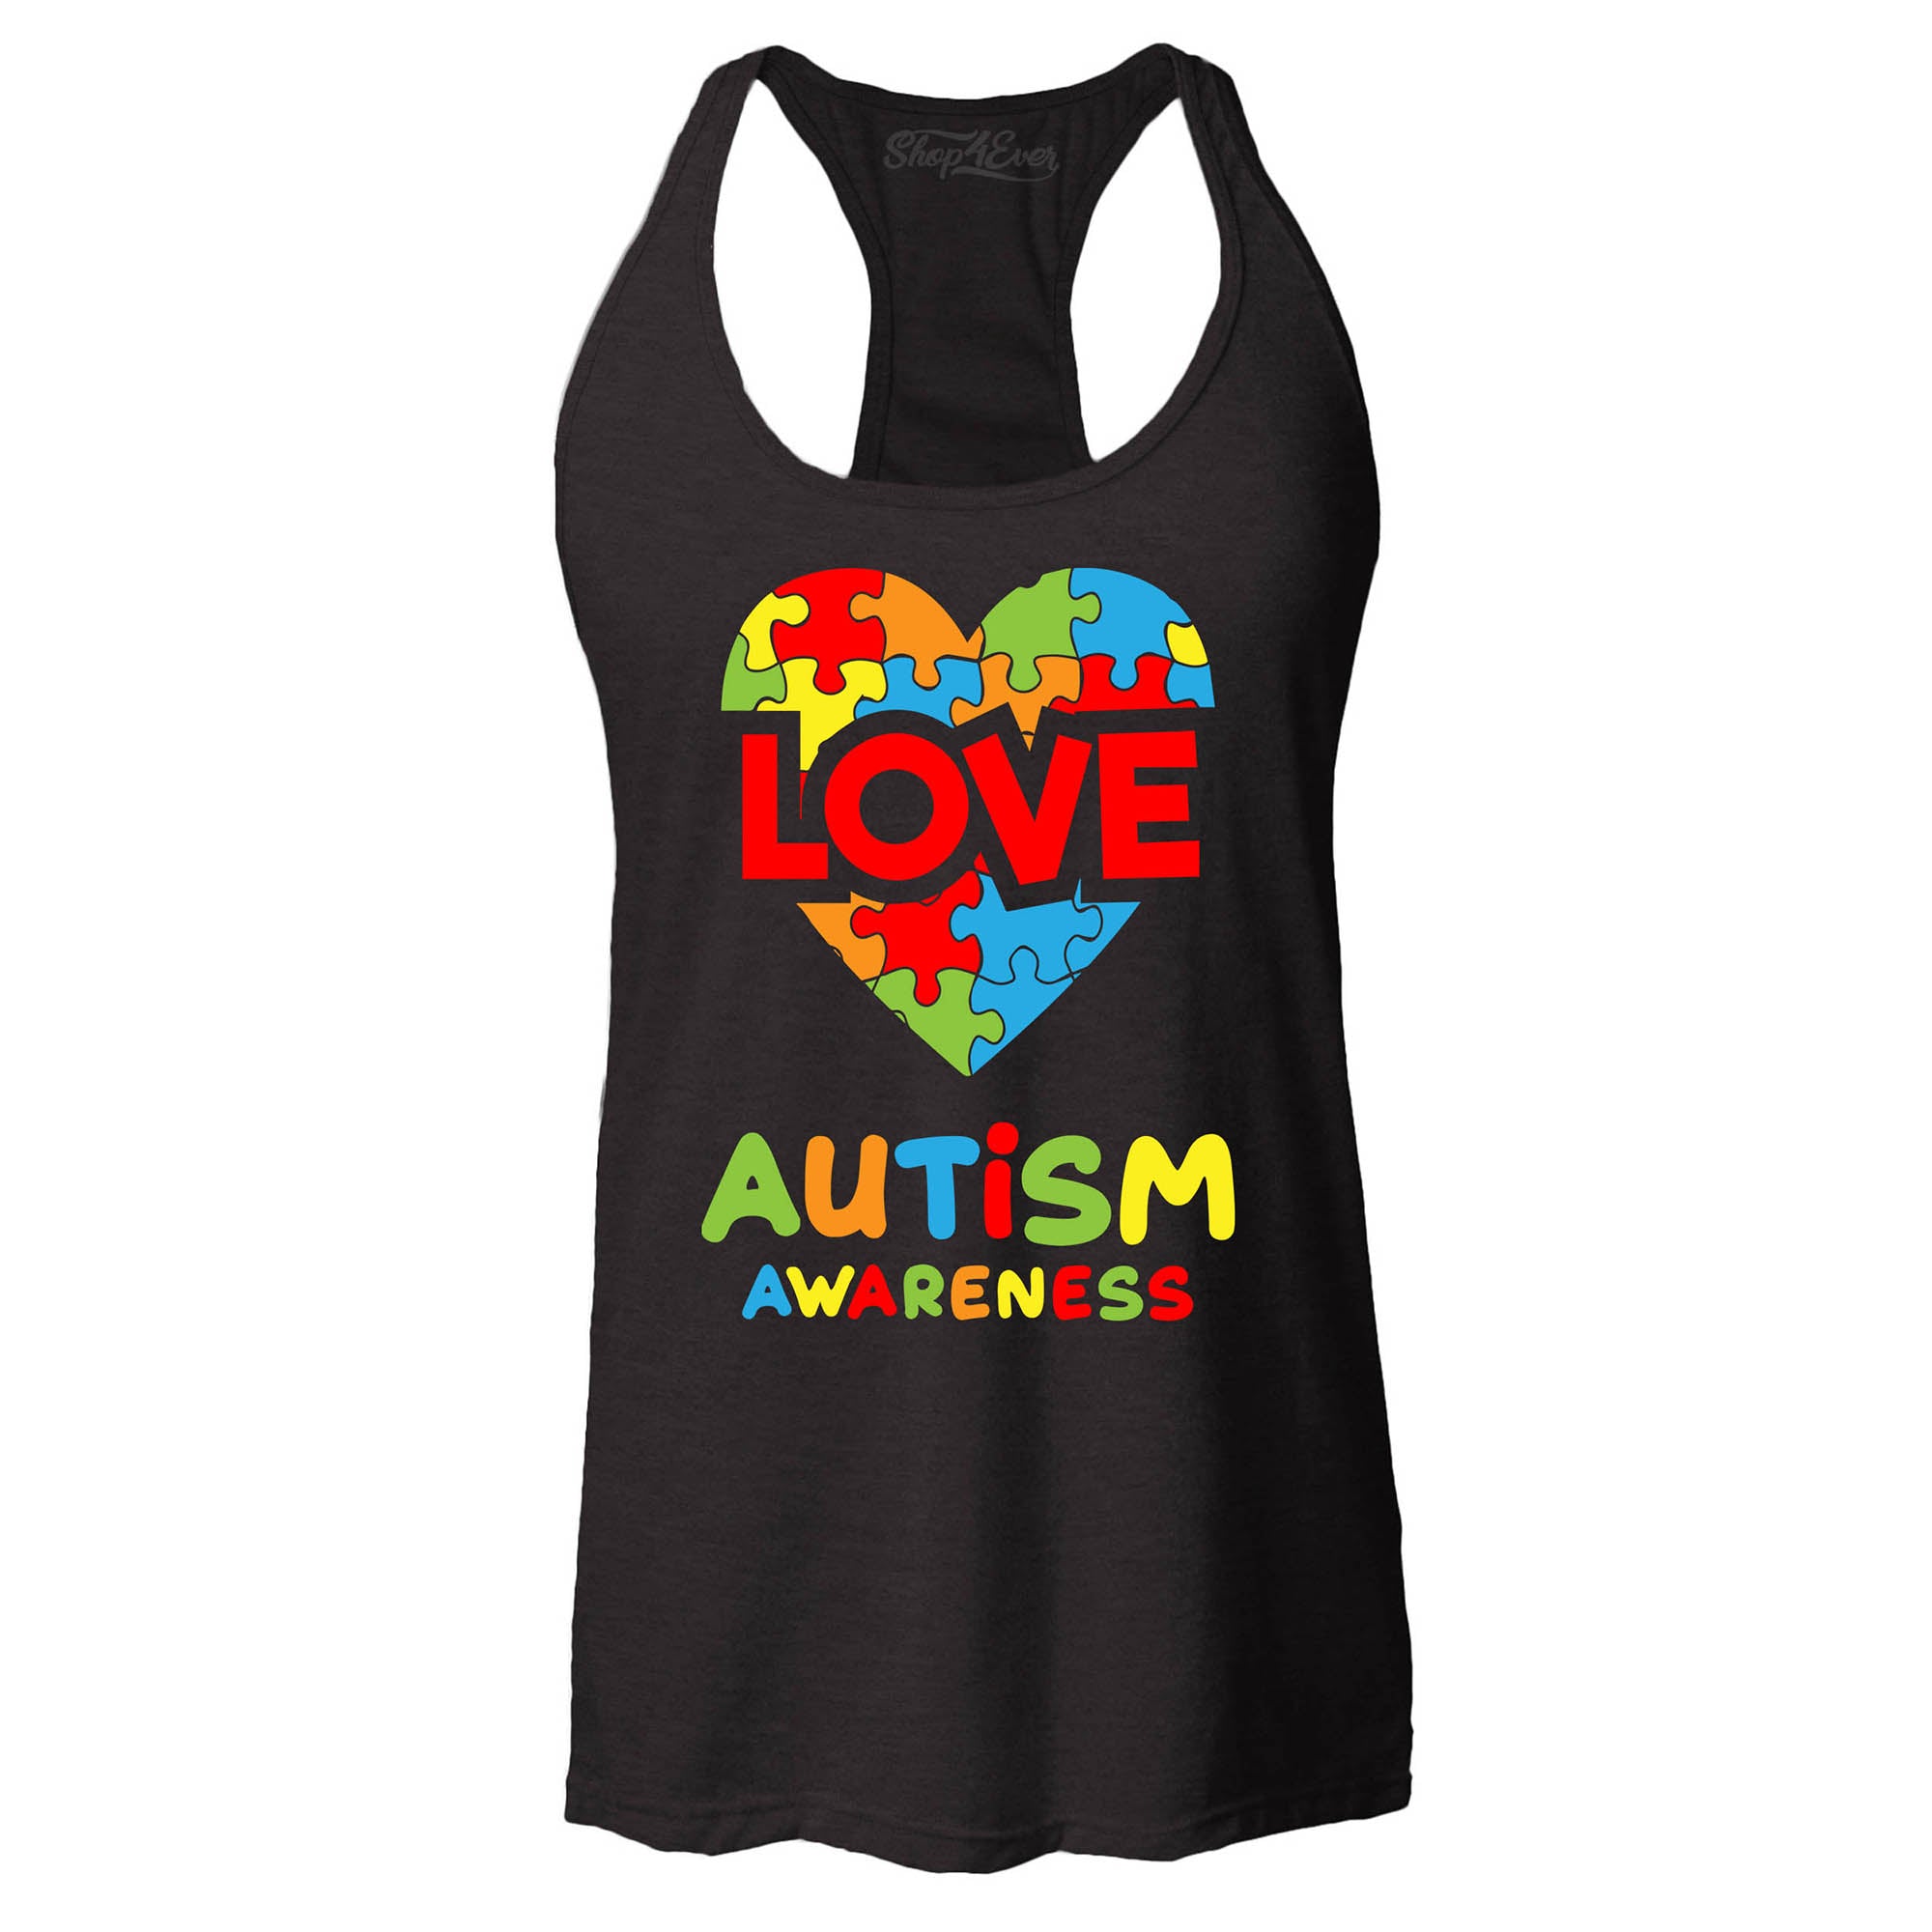 Autism Awareness Love with Puzzled Heart Women's Racerback Tank Top Slim Fit